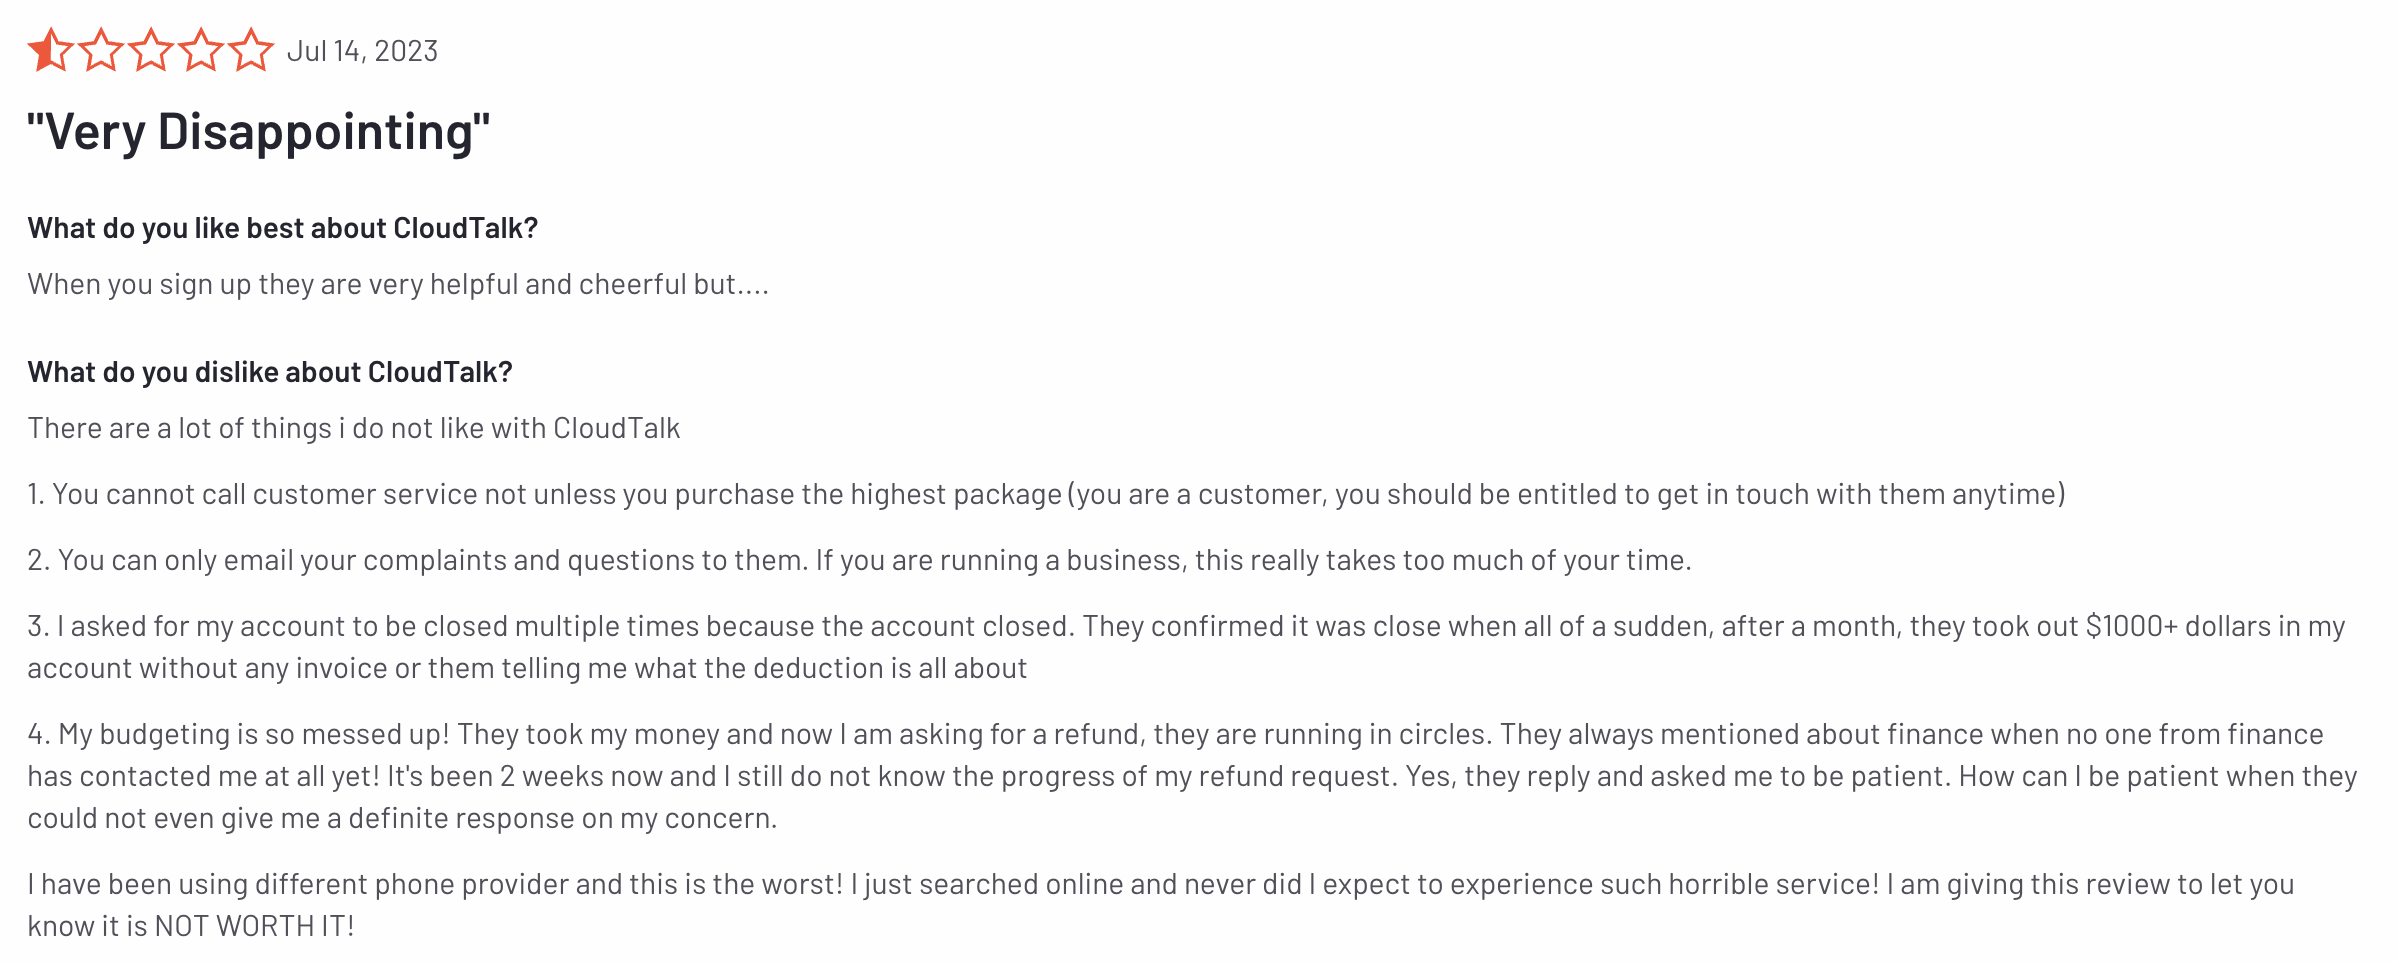 One customer said about CloudTalk in a critical review